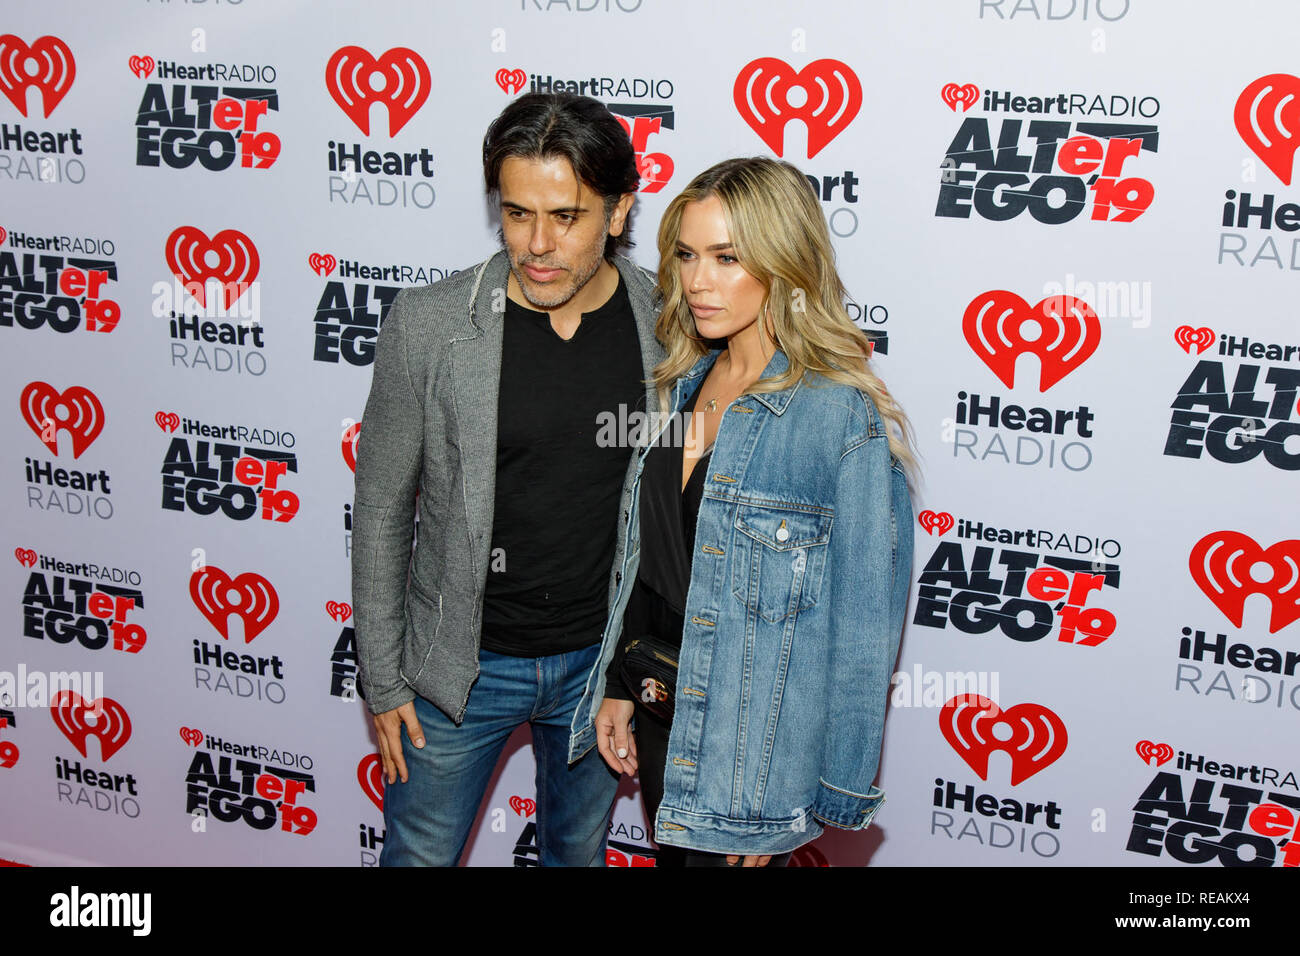 San Diego, California, USA. 19th Jan, 2019. Edwin Arroyave and Teddi Jo Mellencamp arrive on the Red Carpet at iheartradio ALTerEGO '19 at The Forum in Inglewood, California on January 19, 2019 Credit: Marissa Carter/ZUMA Wire/Alamy Live News Stock Photo